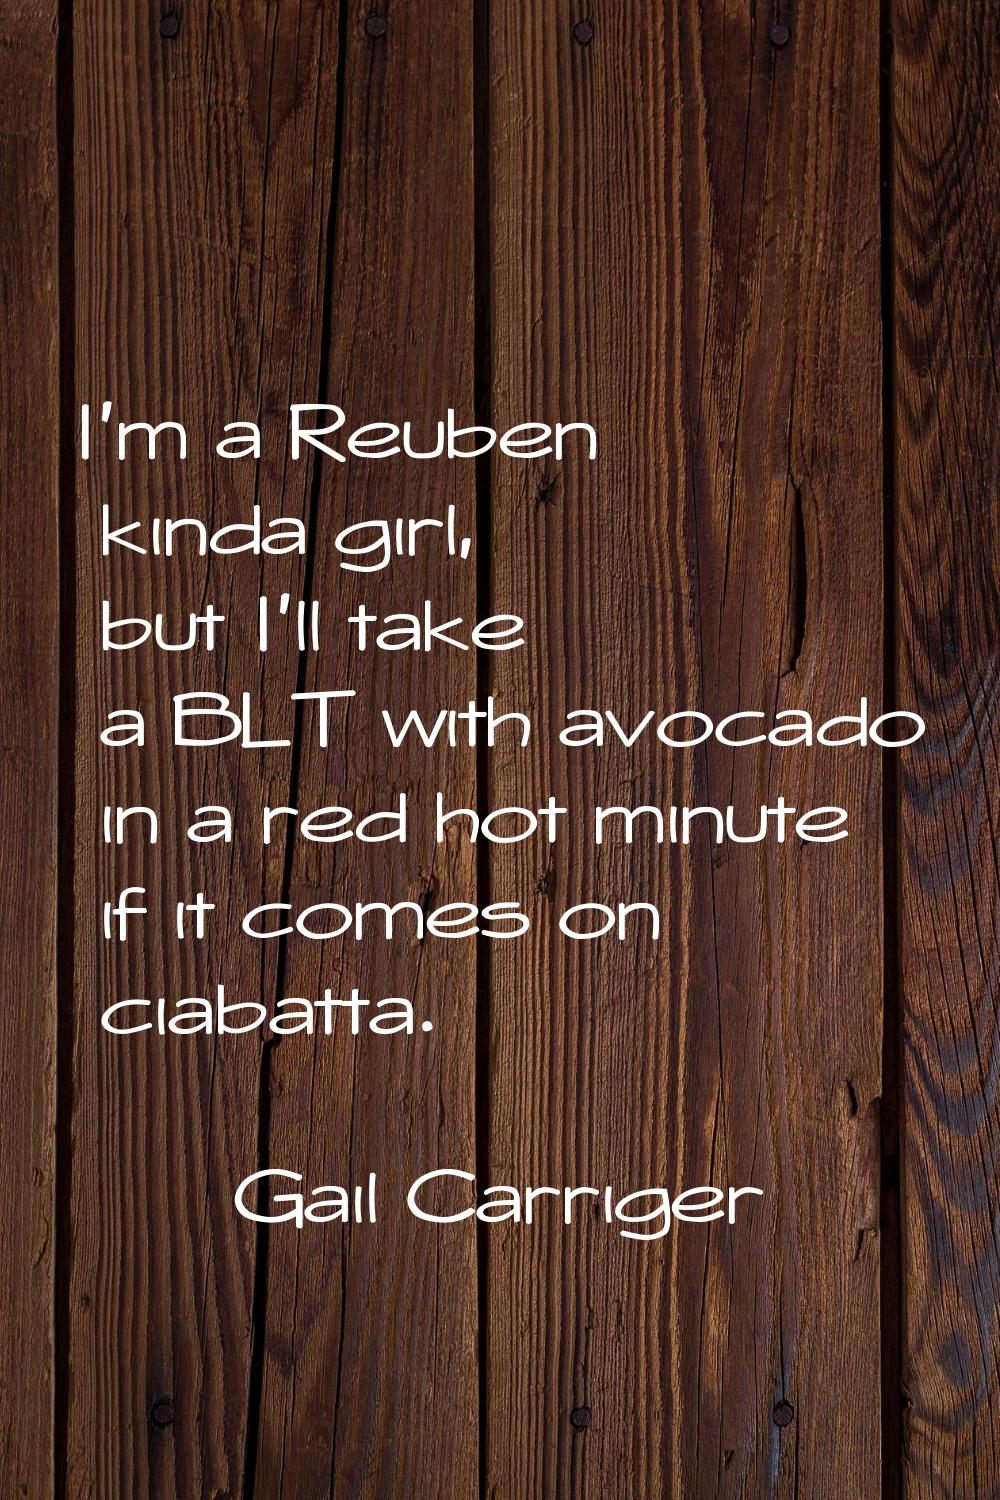 I'm a Reuben kinda girl, but I'll take a BLT with avocado in a red hot minute if it comes on ciabat